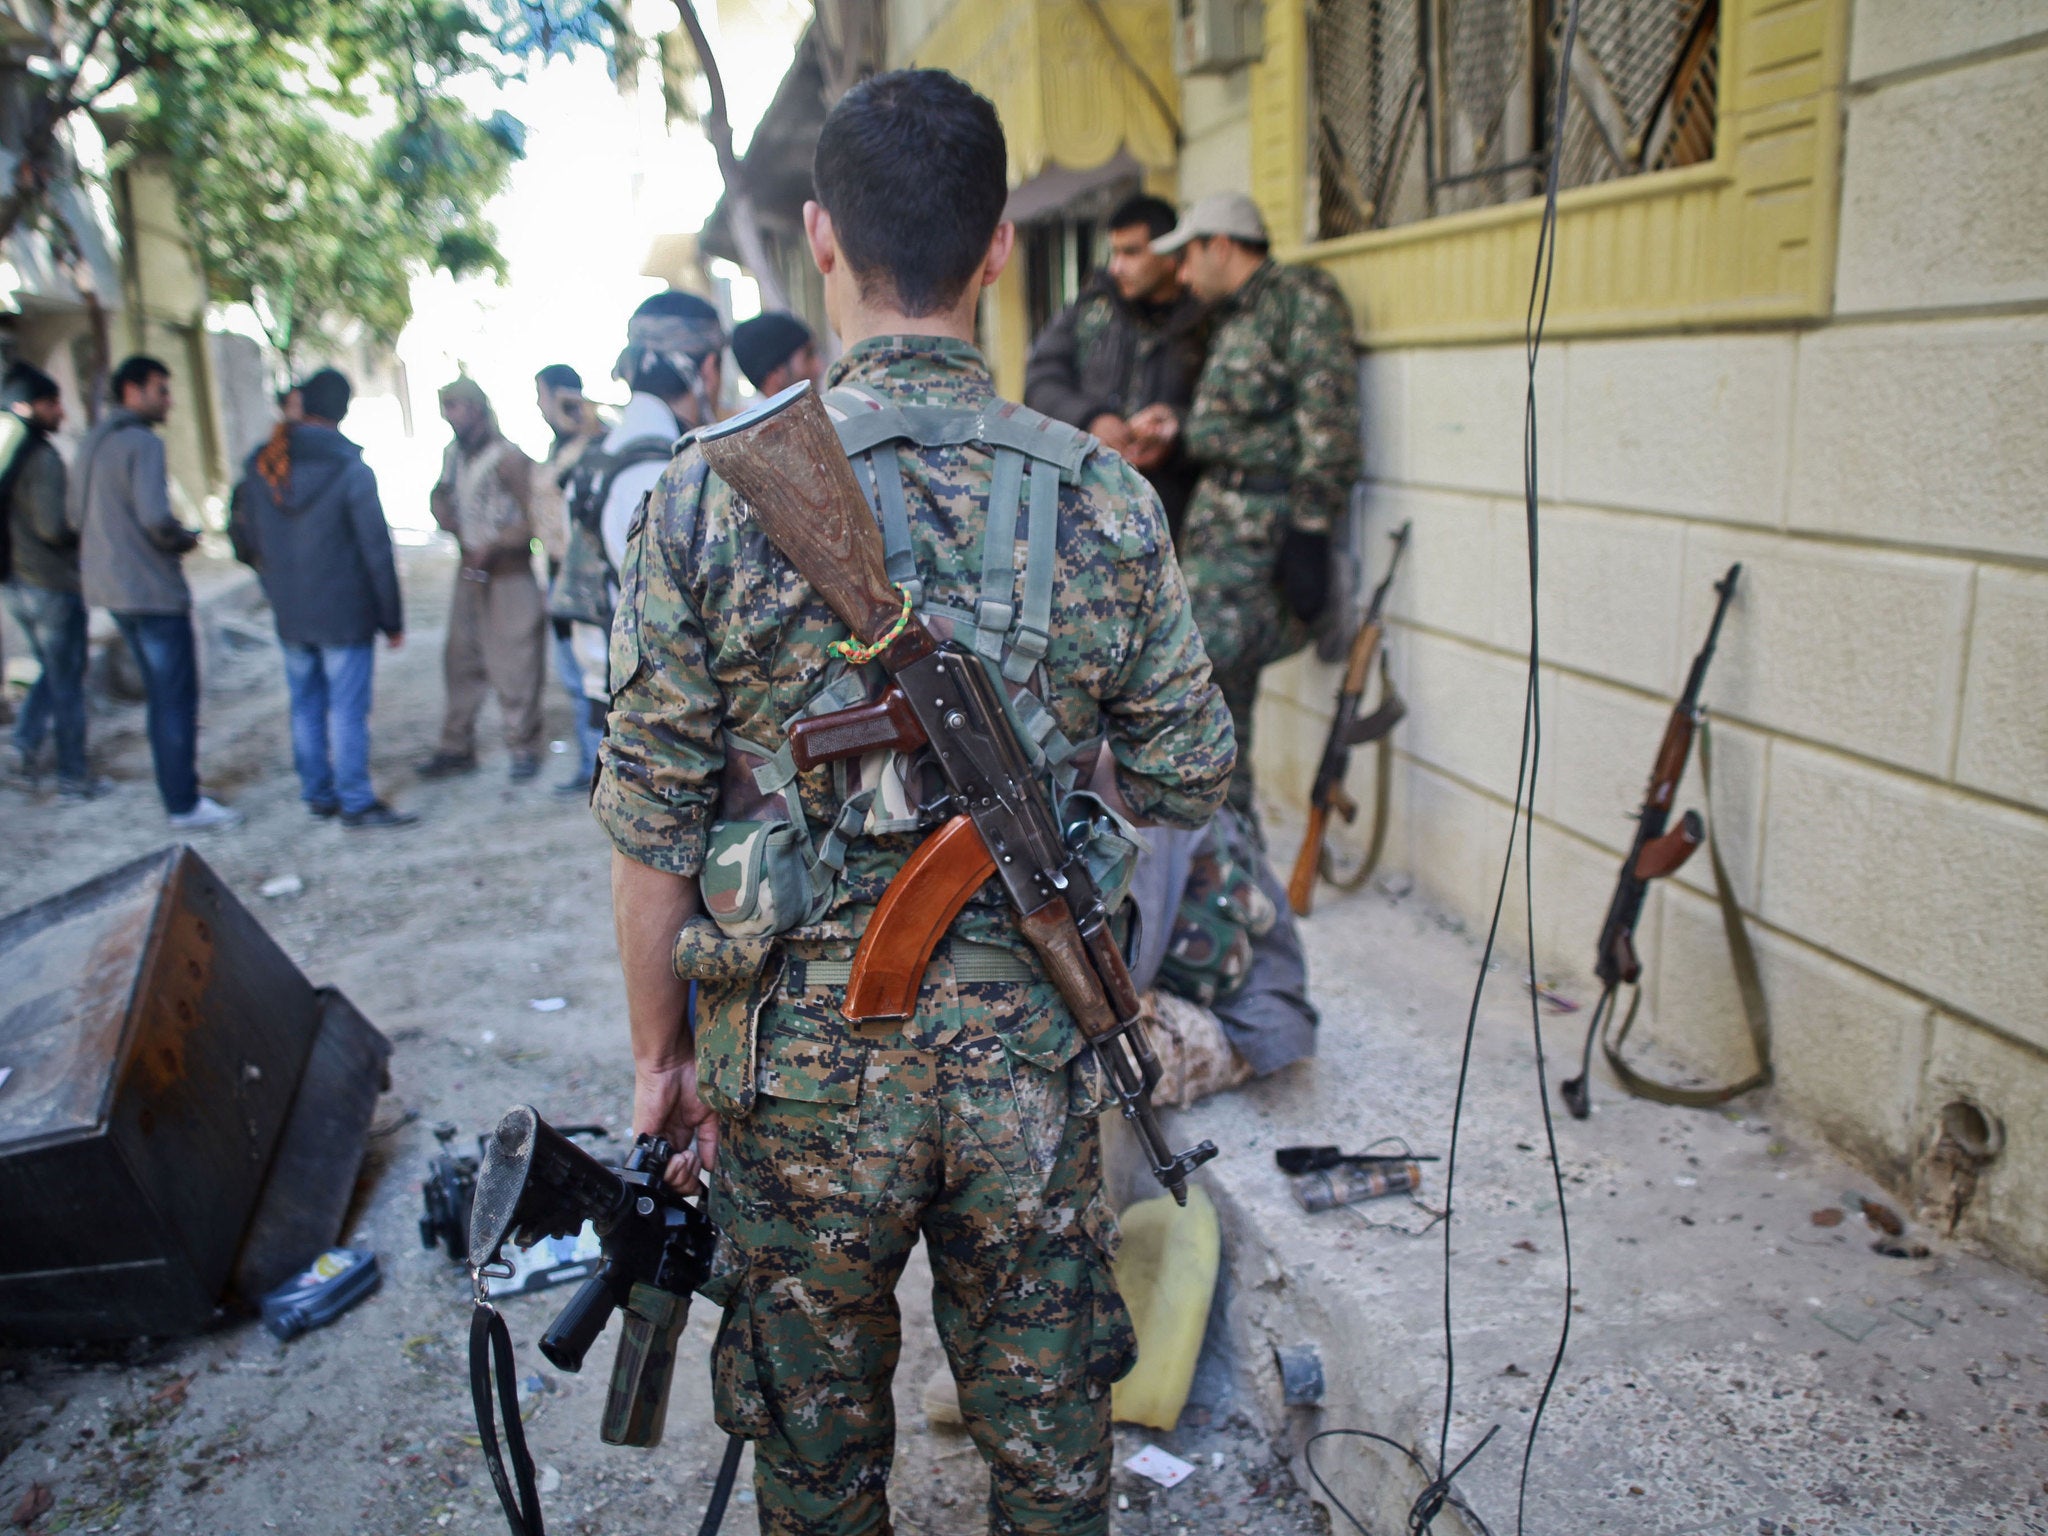 This is the first time that Islamic State have used poisonous gas against the YPG, a YPG spokesman said.